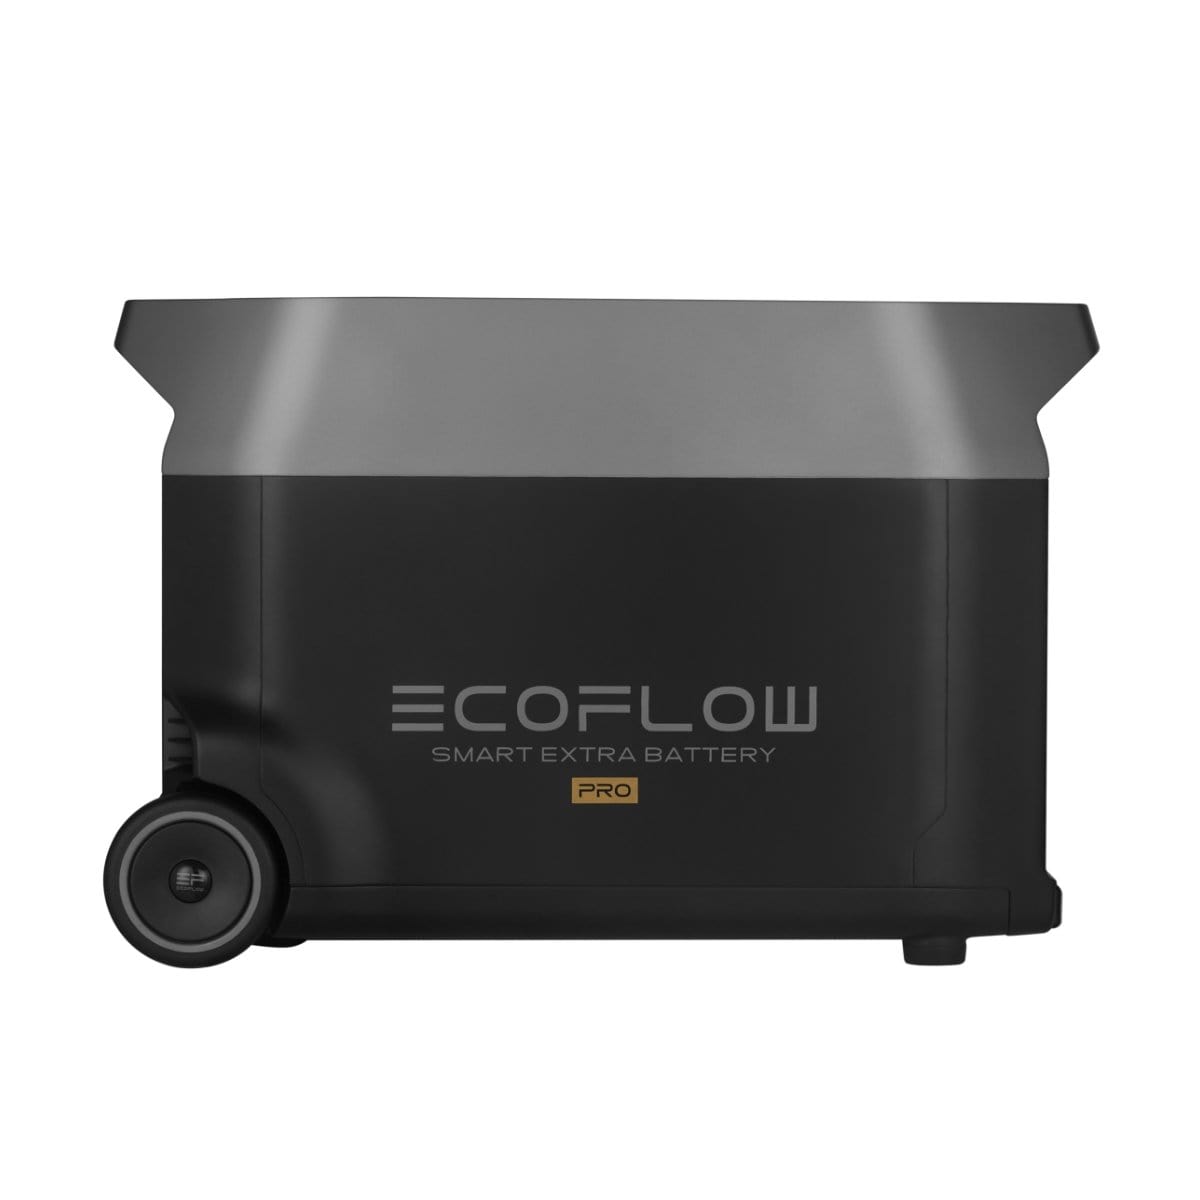 EcoFlow 3600Wh Smart Extra Battery For Delta Pro Portable Power Station DELTAProEB-US